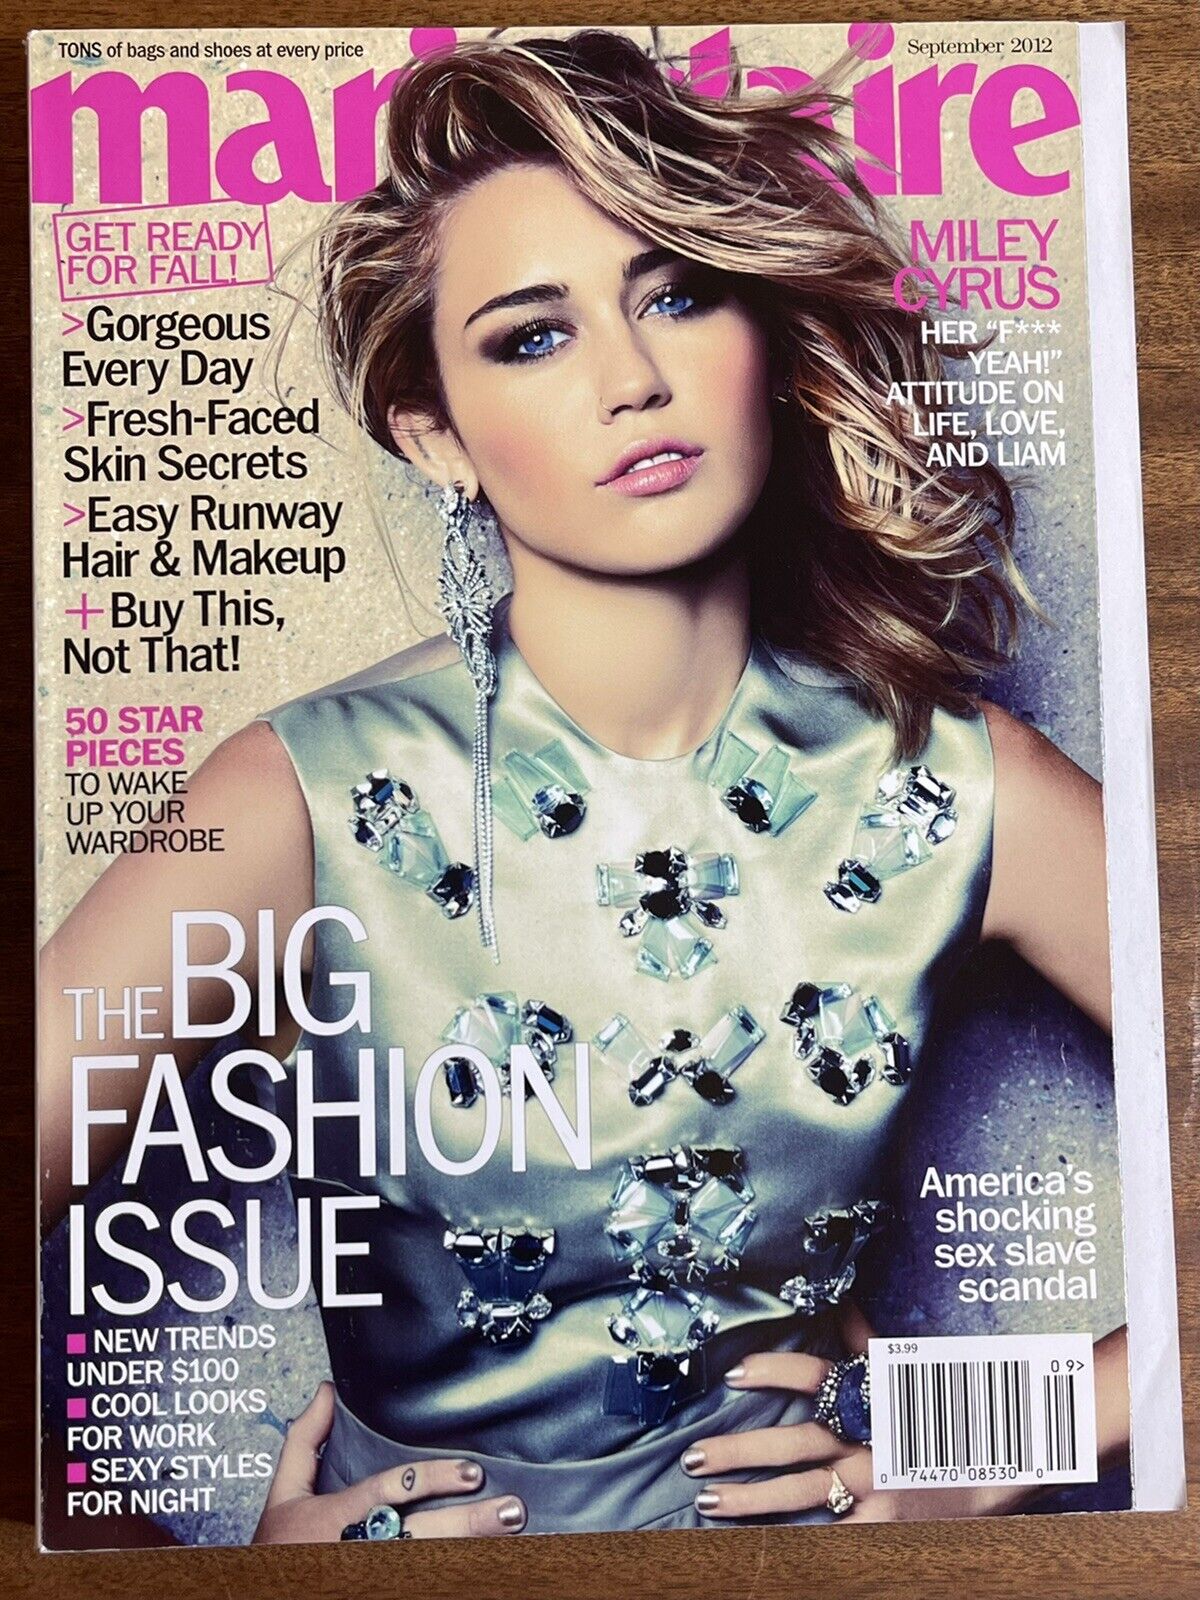 MILEY CYRUS * THE BIG FASHION ISSUE September 2012 MARIE CLAIRE MAGAZINE